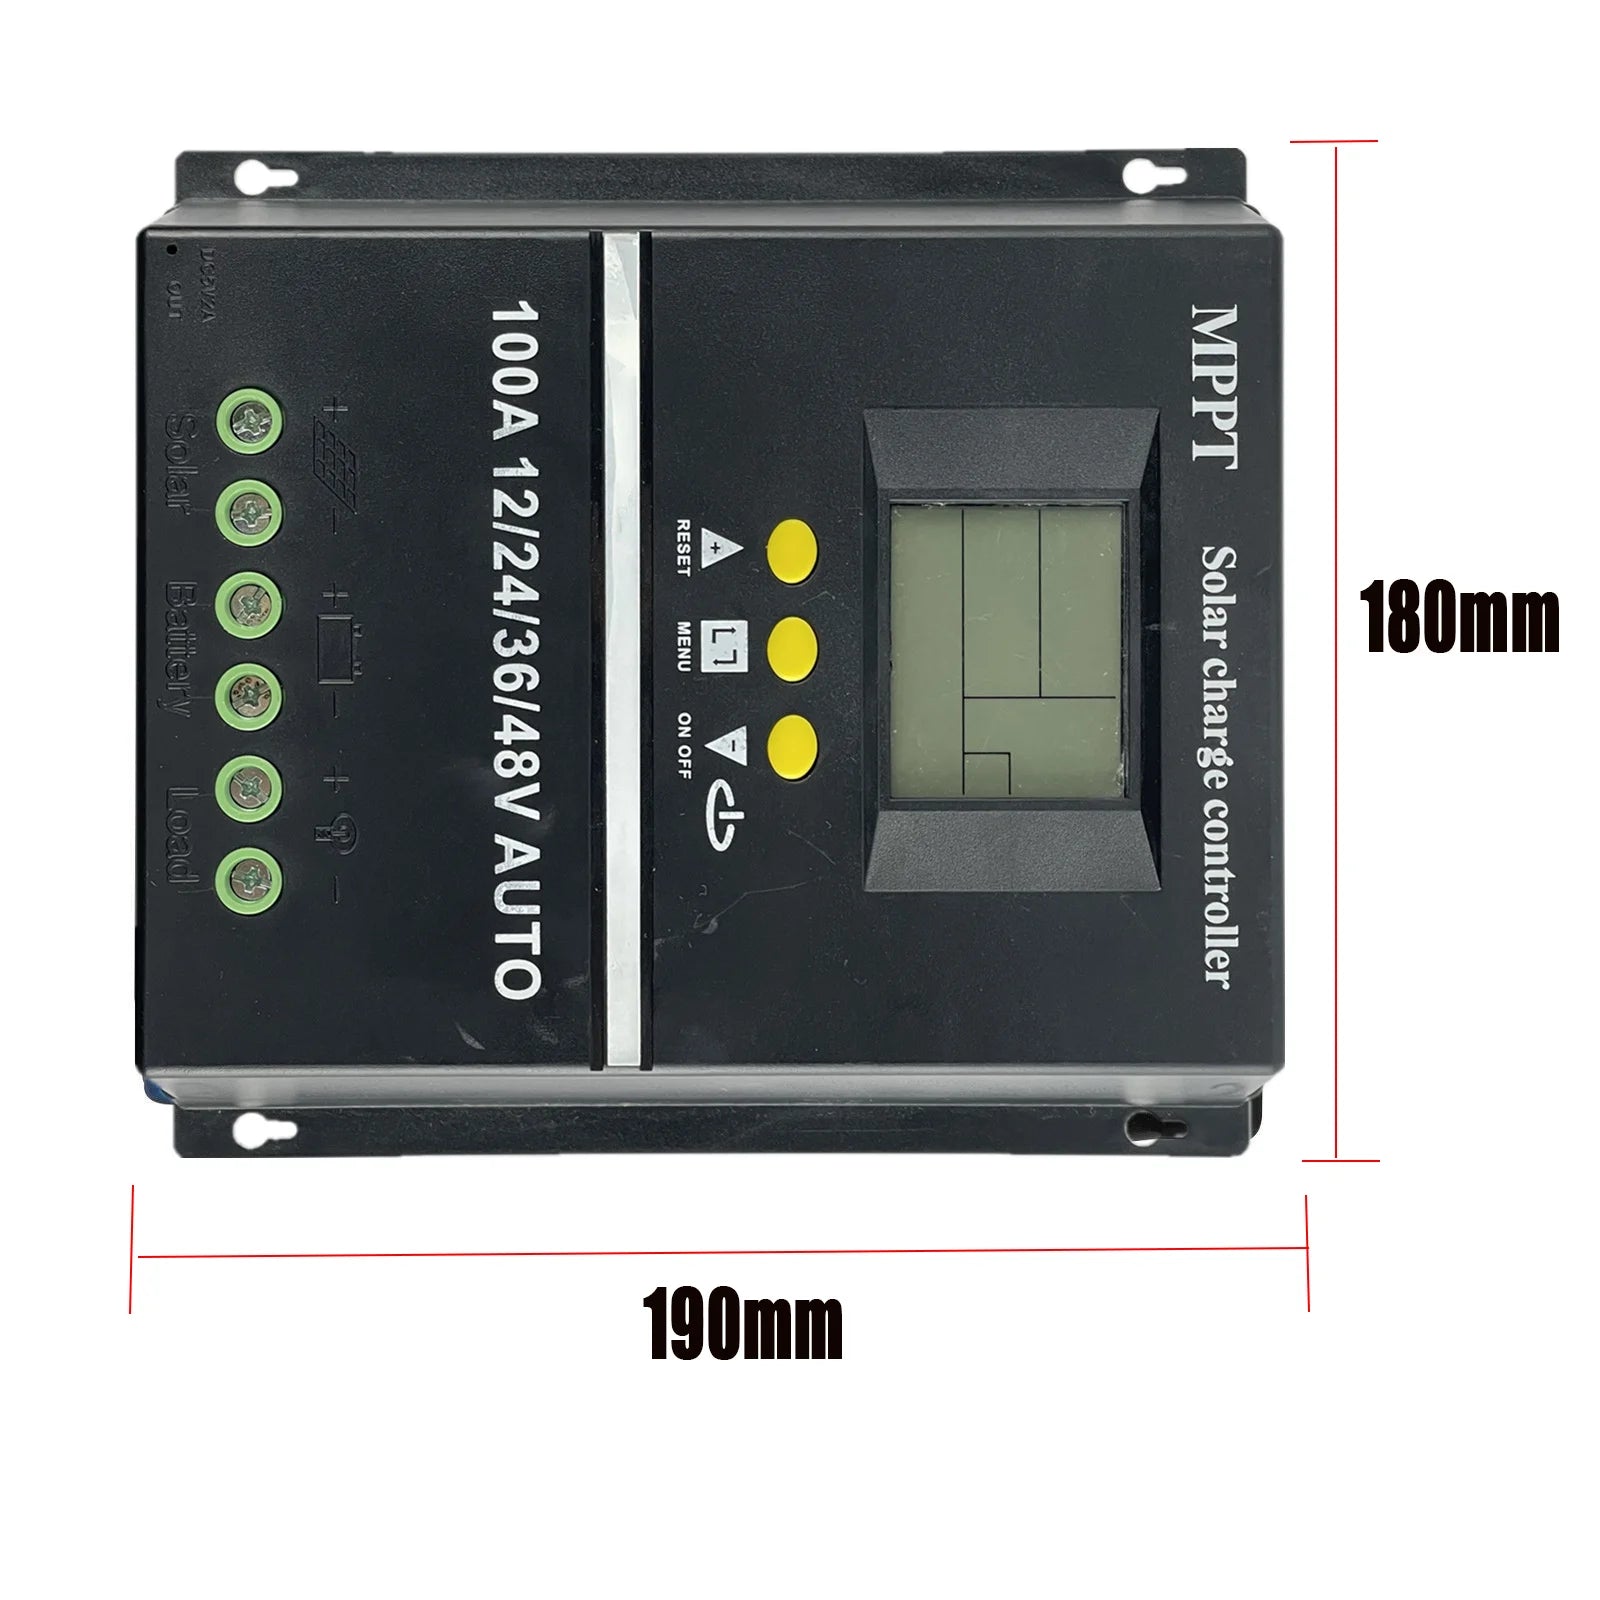 100A 80A 60A MPPT Solar Charge Controller, Install solar panel on charge controller's input and output to battery for efficient energy harvesting.